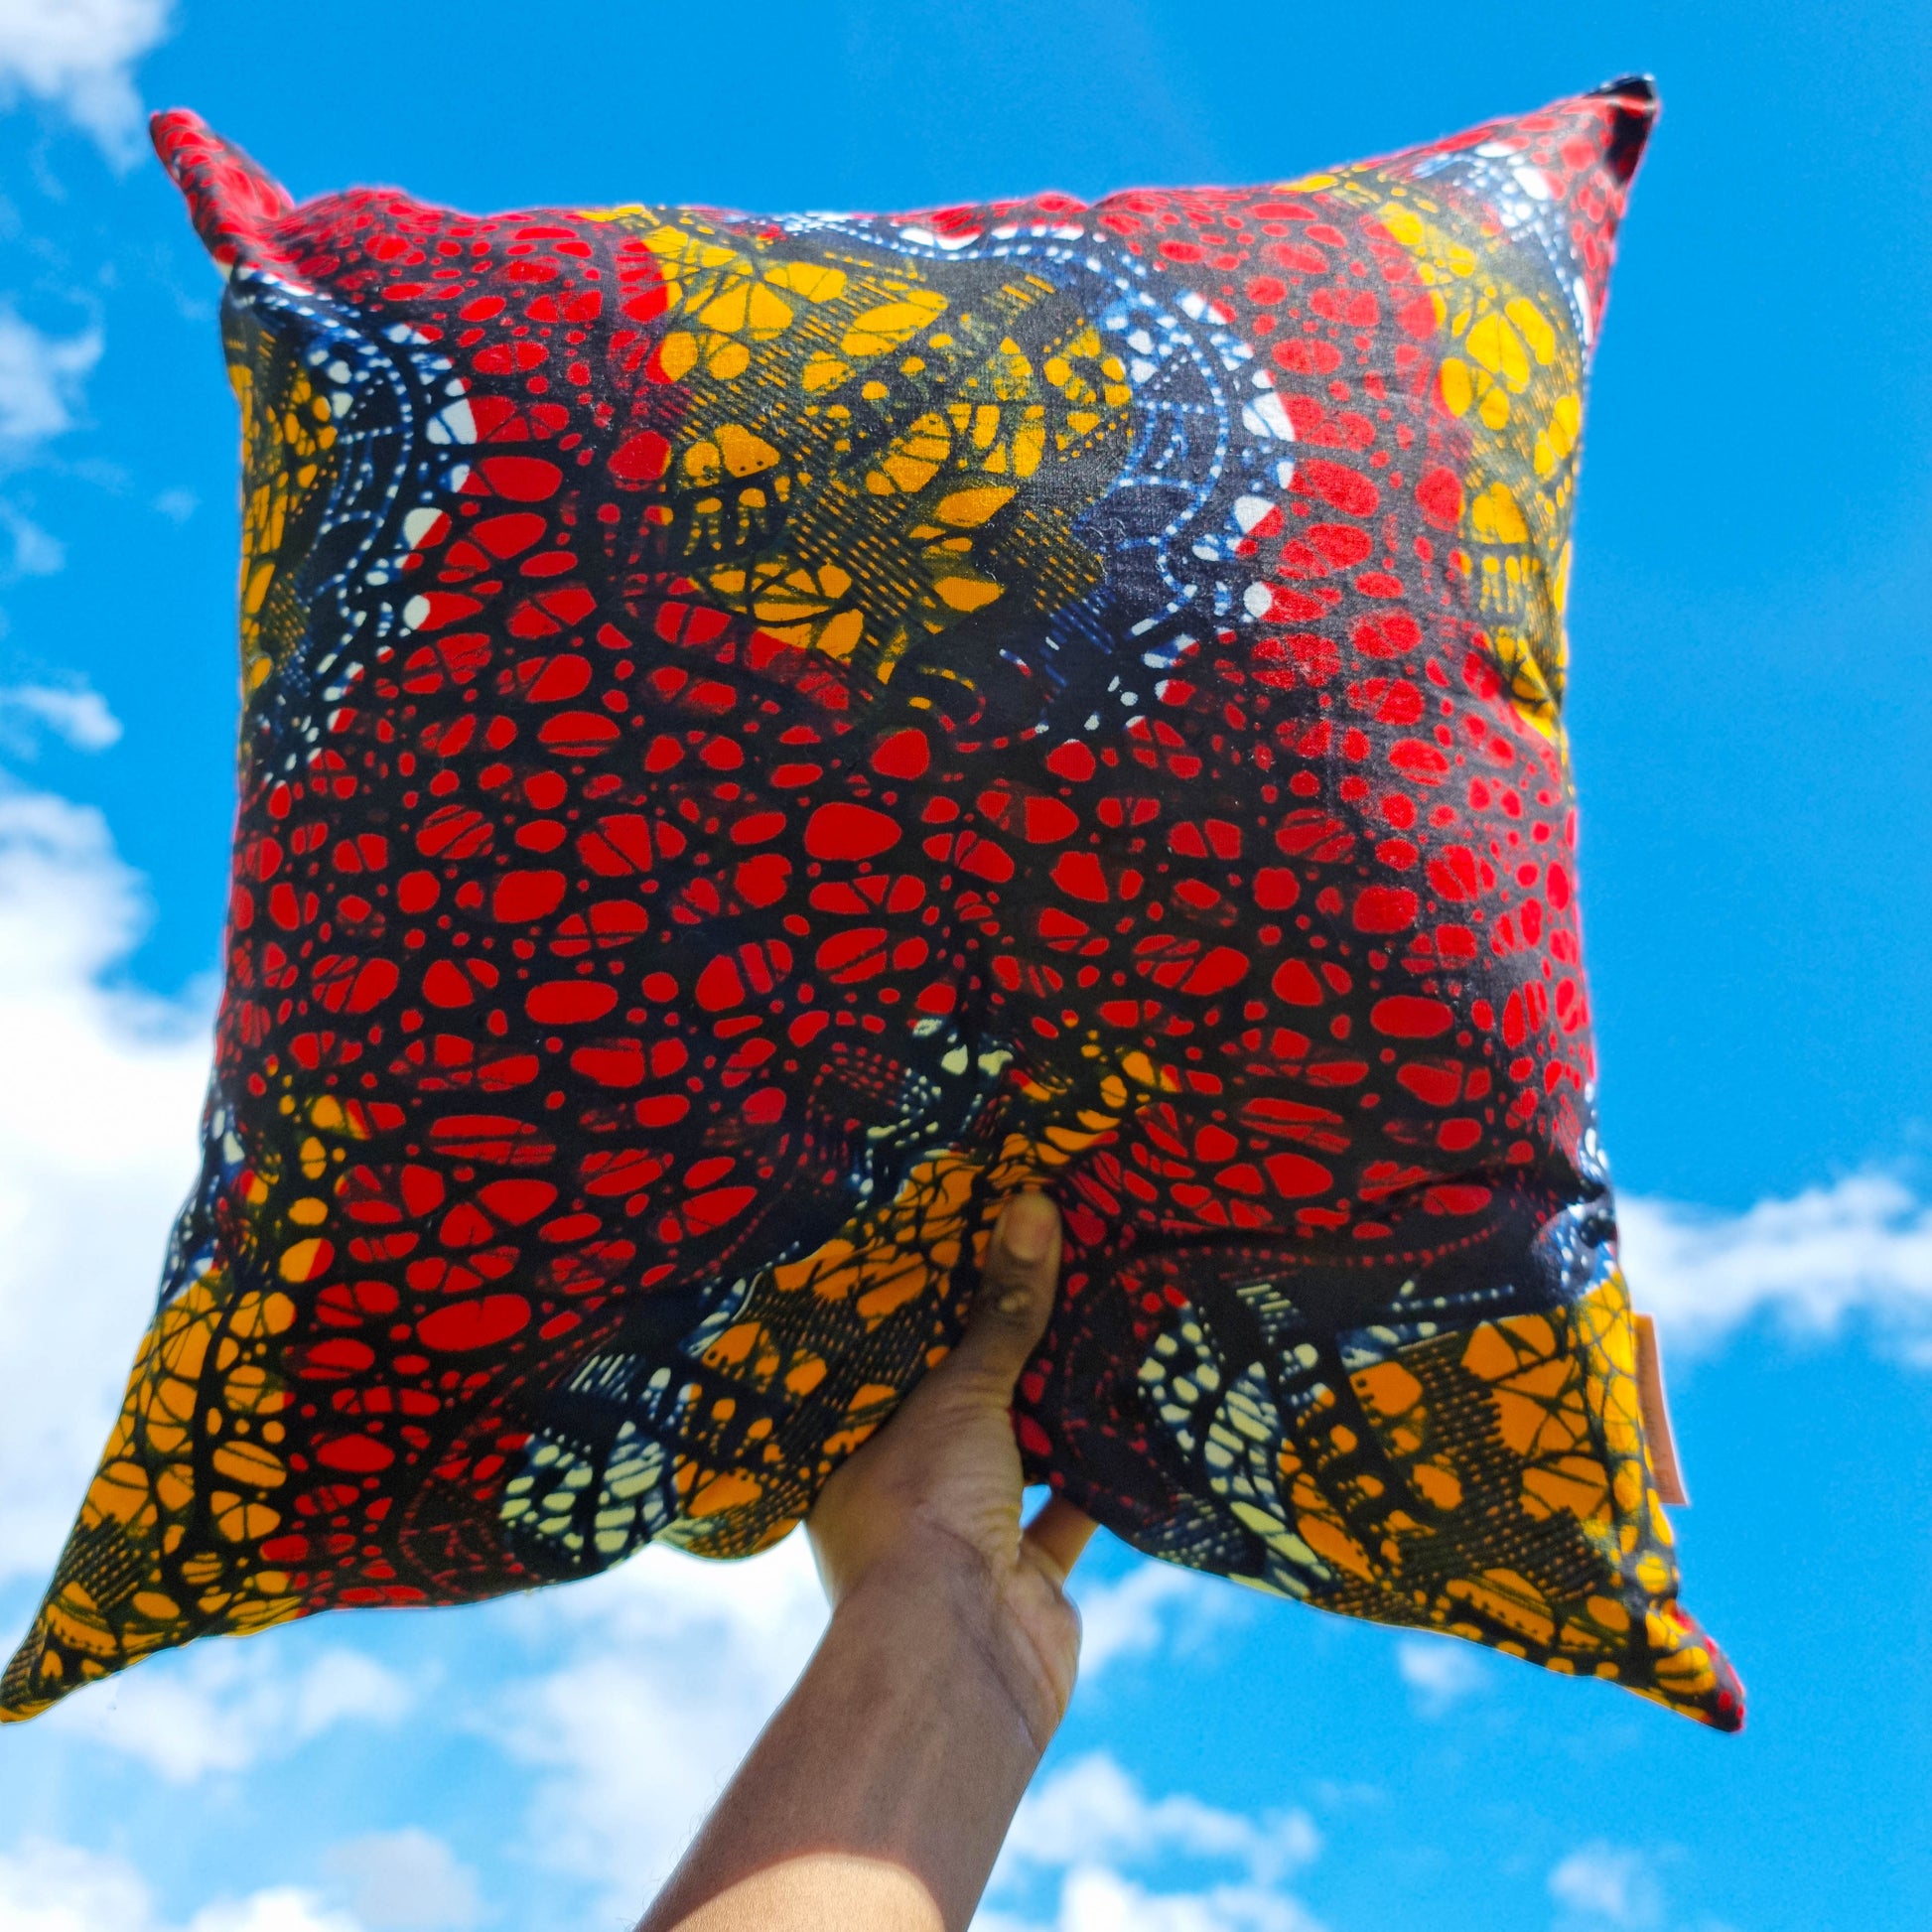 Large Osime Home Eno Cushion held up in the bright blue sky with clouds in the background.